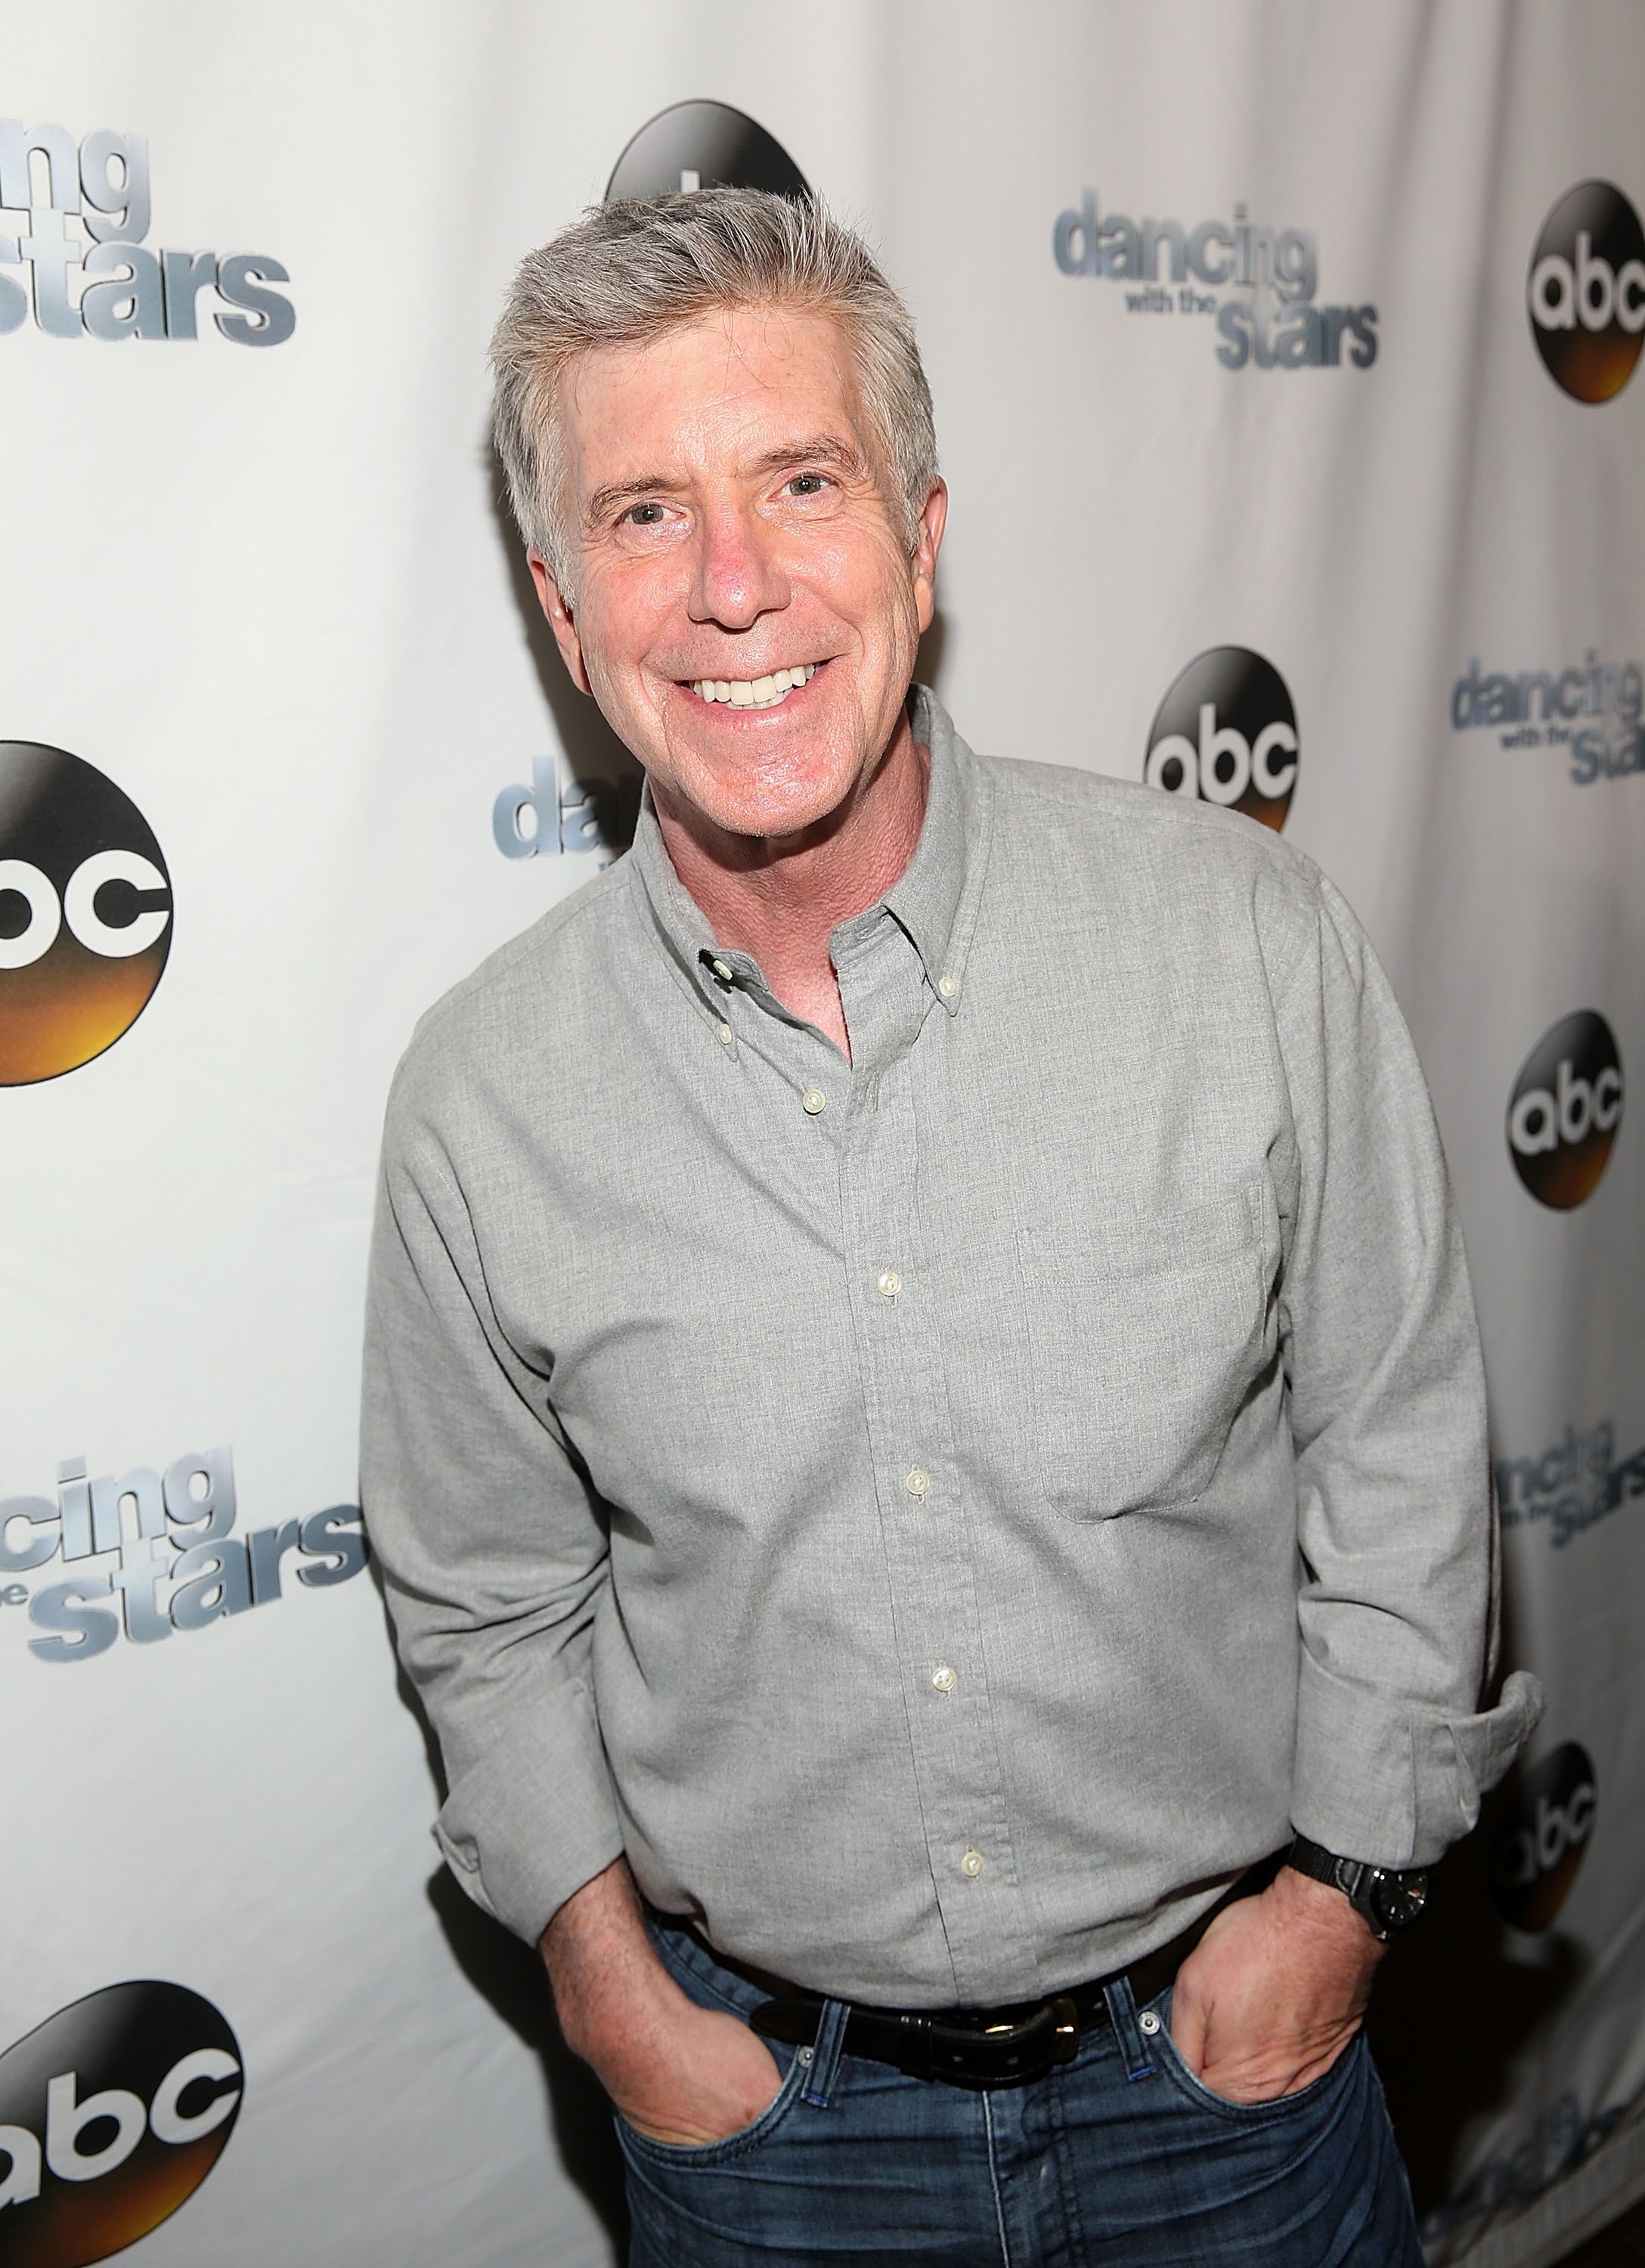 Tom Bergeron at the "Dancing With The Stars" semi-finals episode celebration at Mixology Grill and Lounge on May 16, 2016 | Source: Getty Images